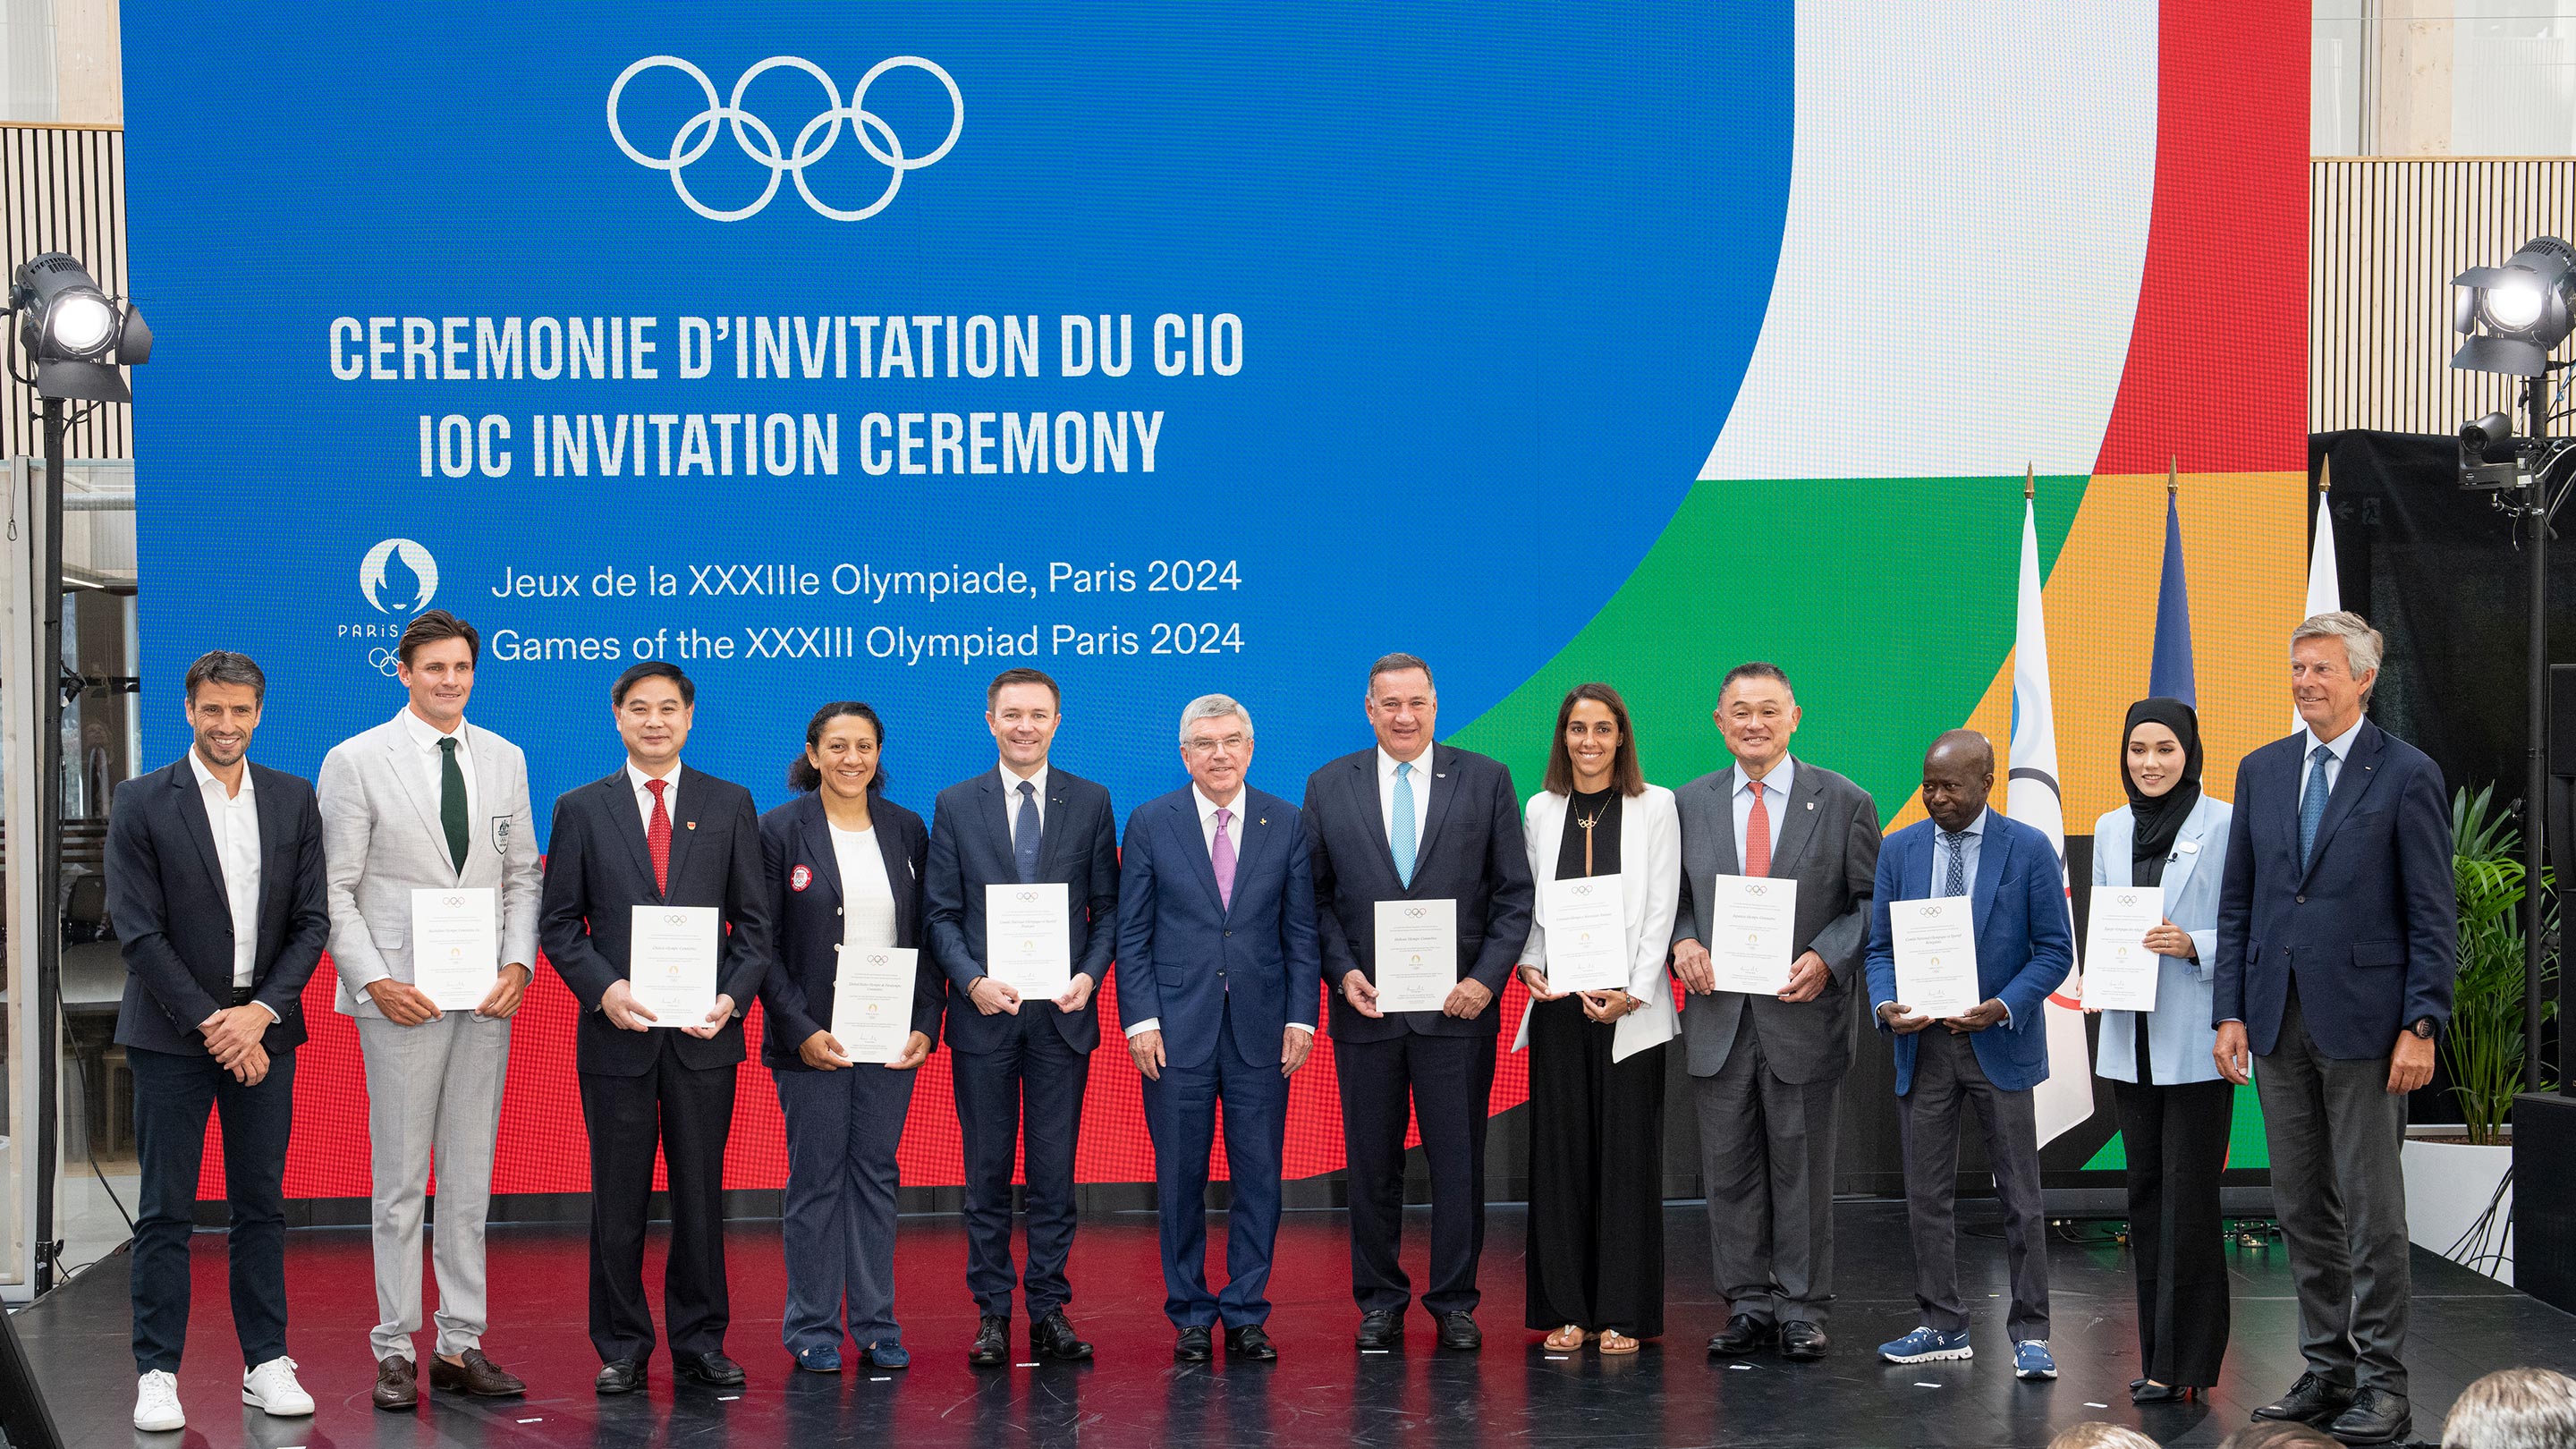 LVMH has become a Premium Partner of the Olympic & Paralympic